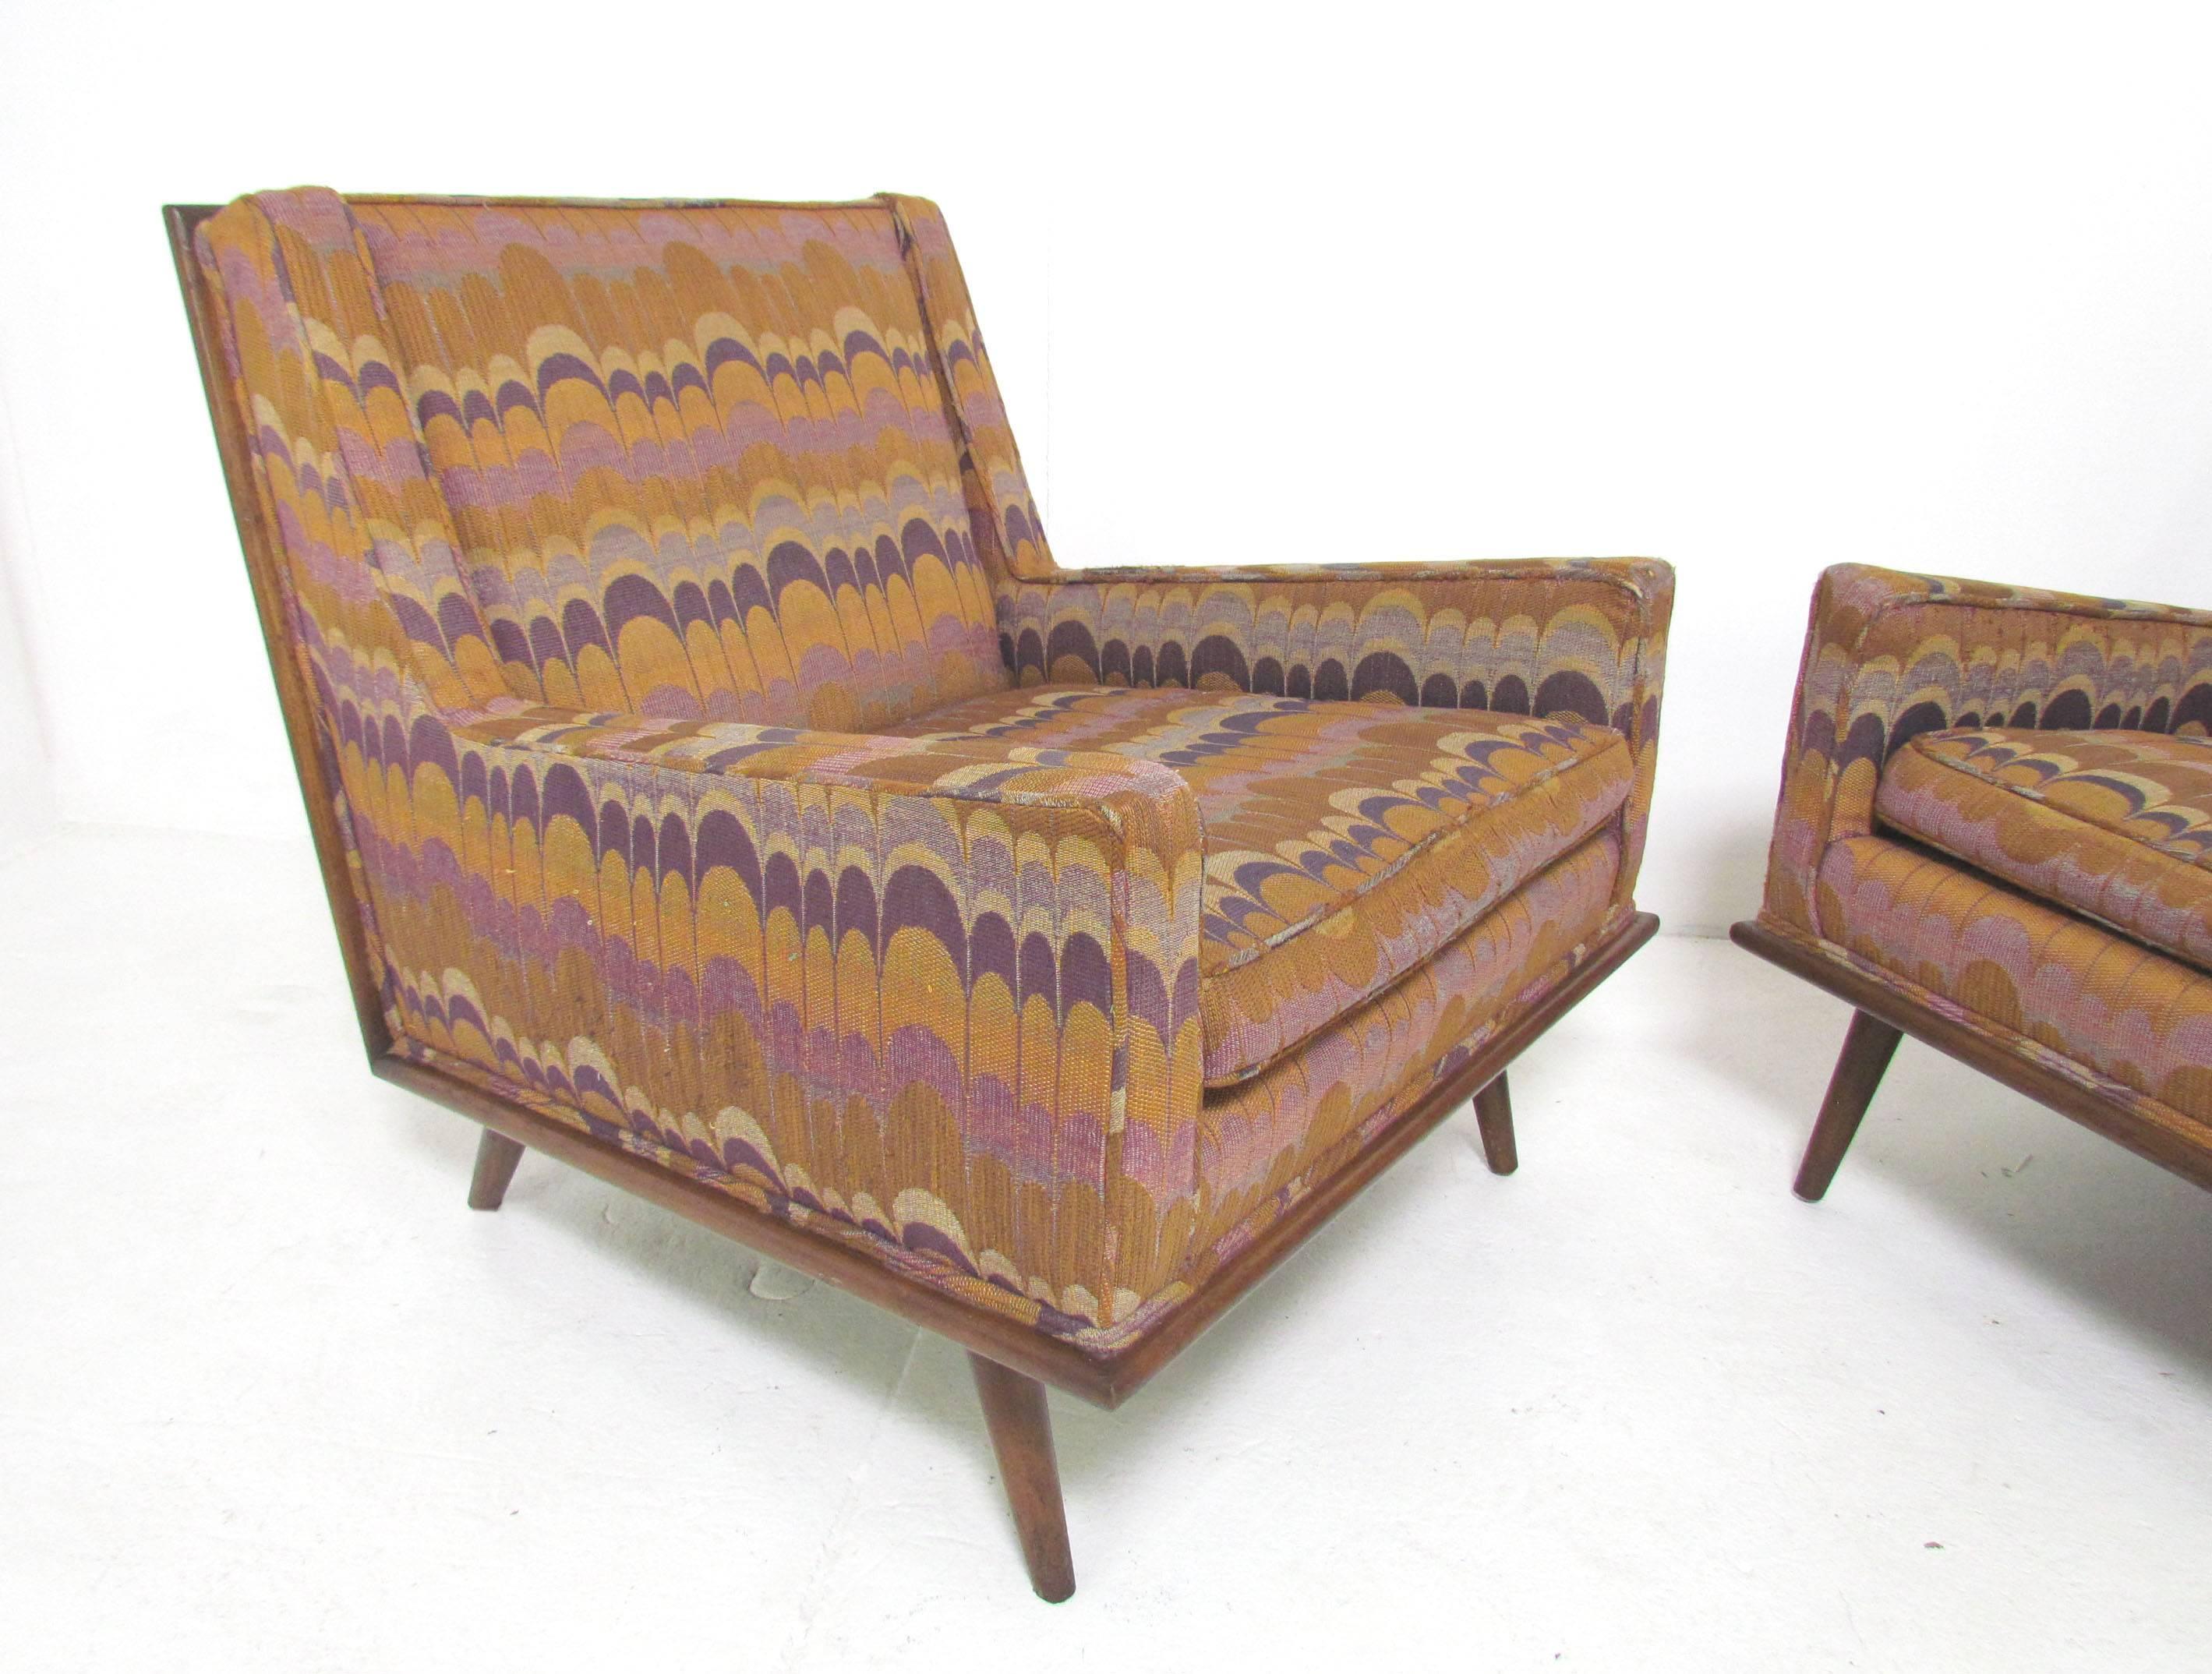 Pair of Mid-Century armchairs with walnut trim at base and back, in the manner of designs by Paul McCobb and Milo Baughman (for James).